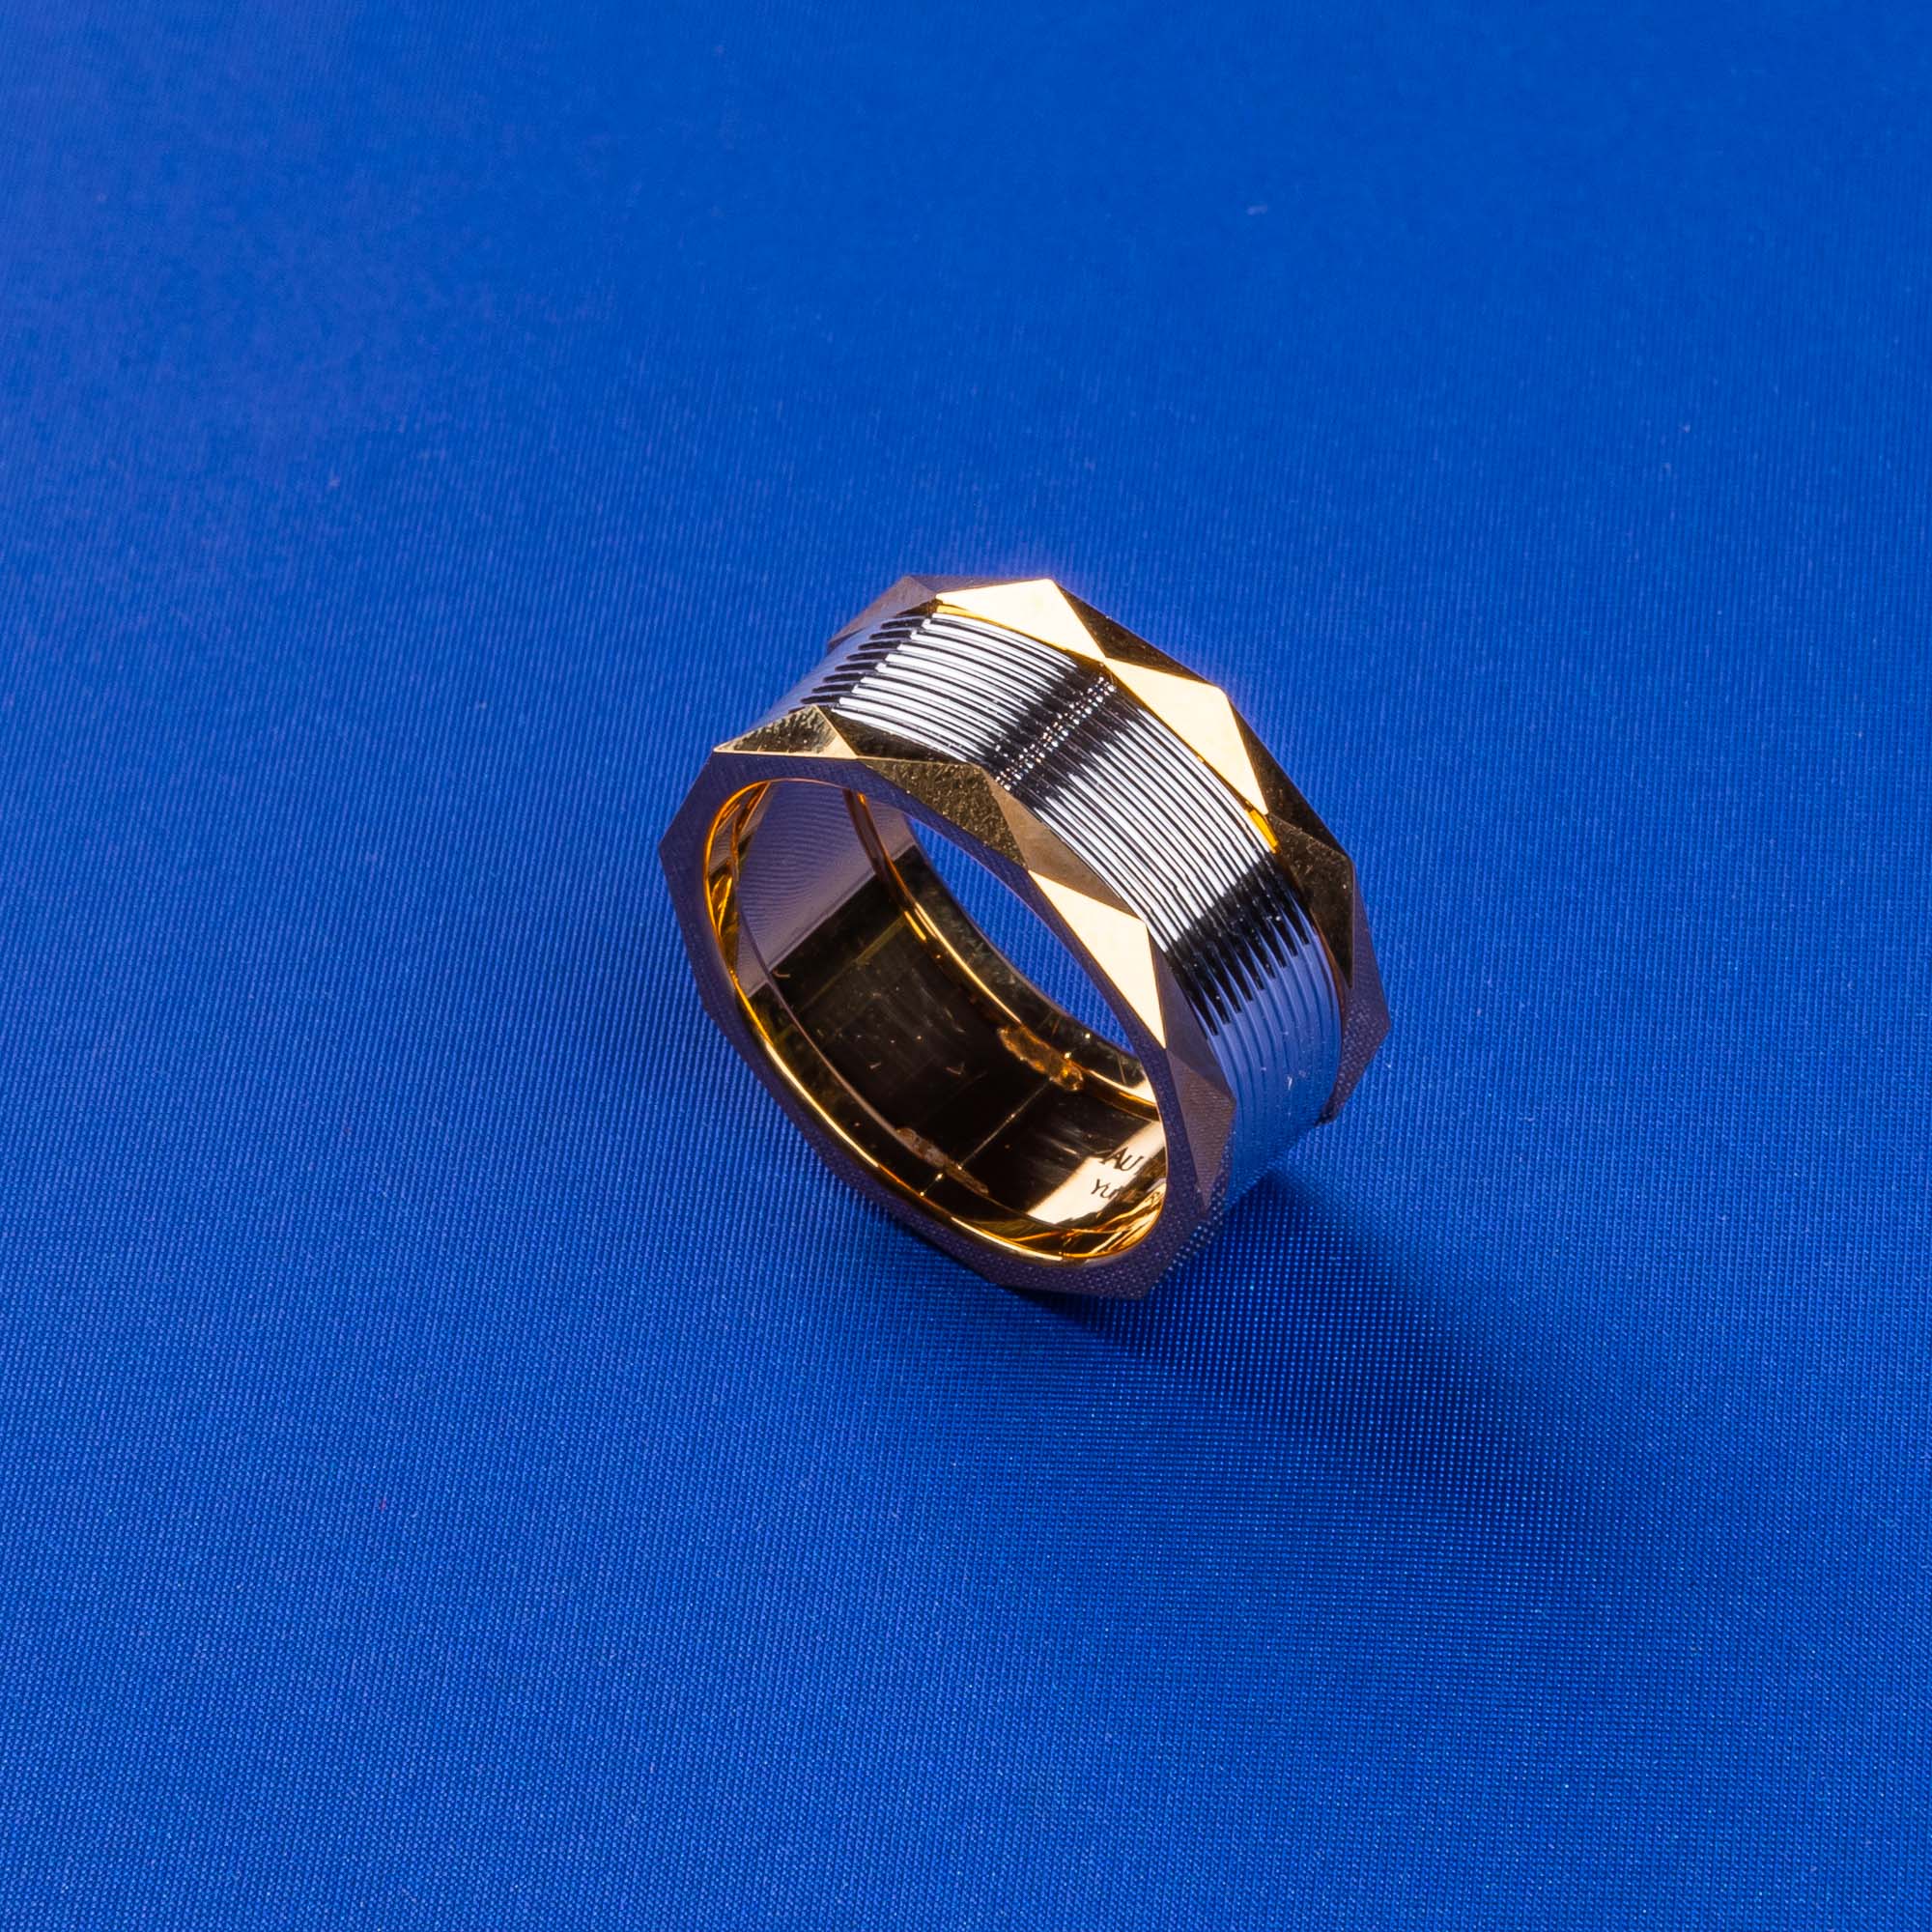 22K Gold Two-Tone Ring/Band